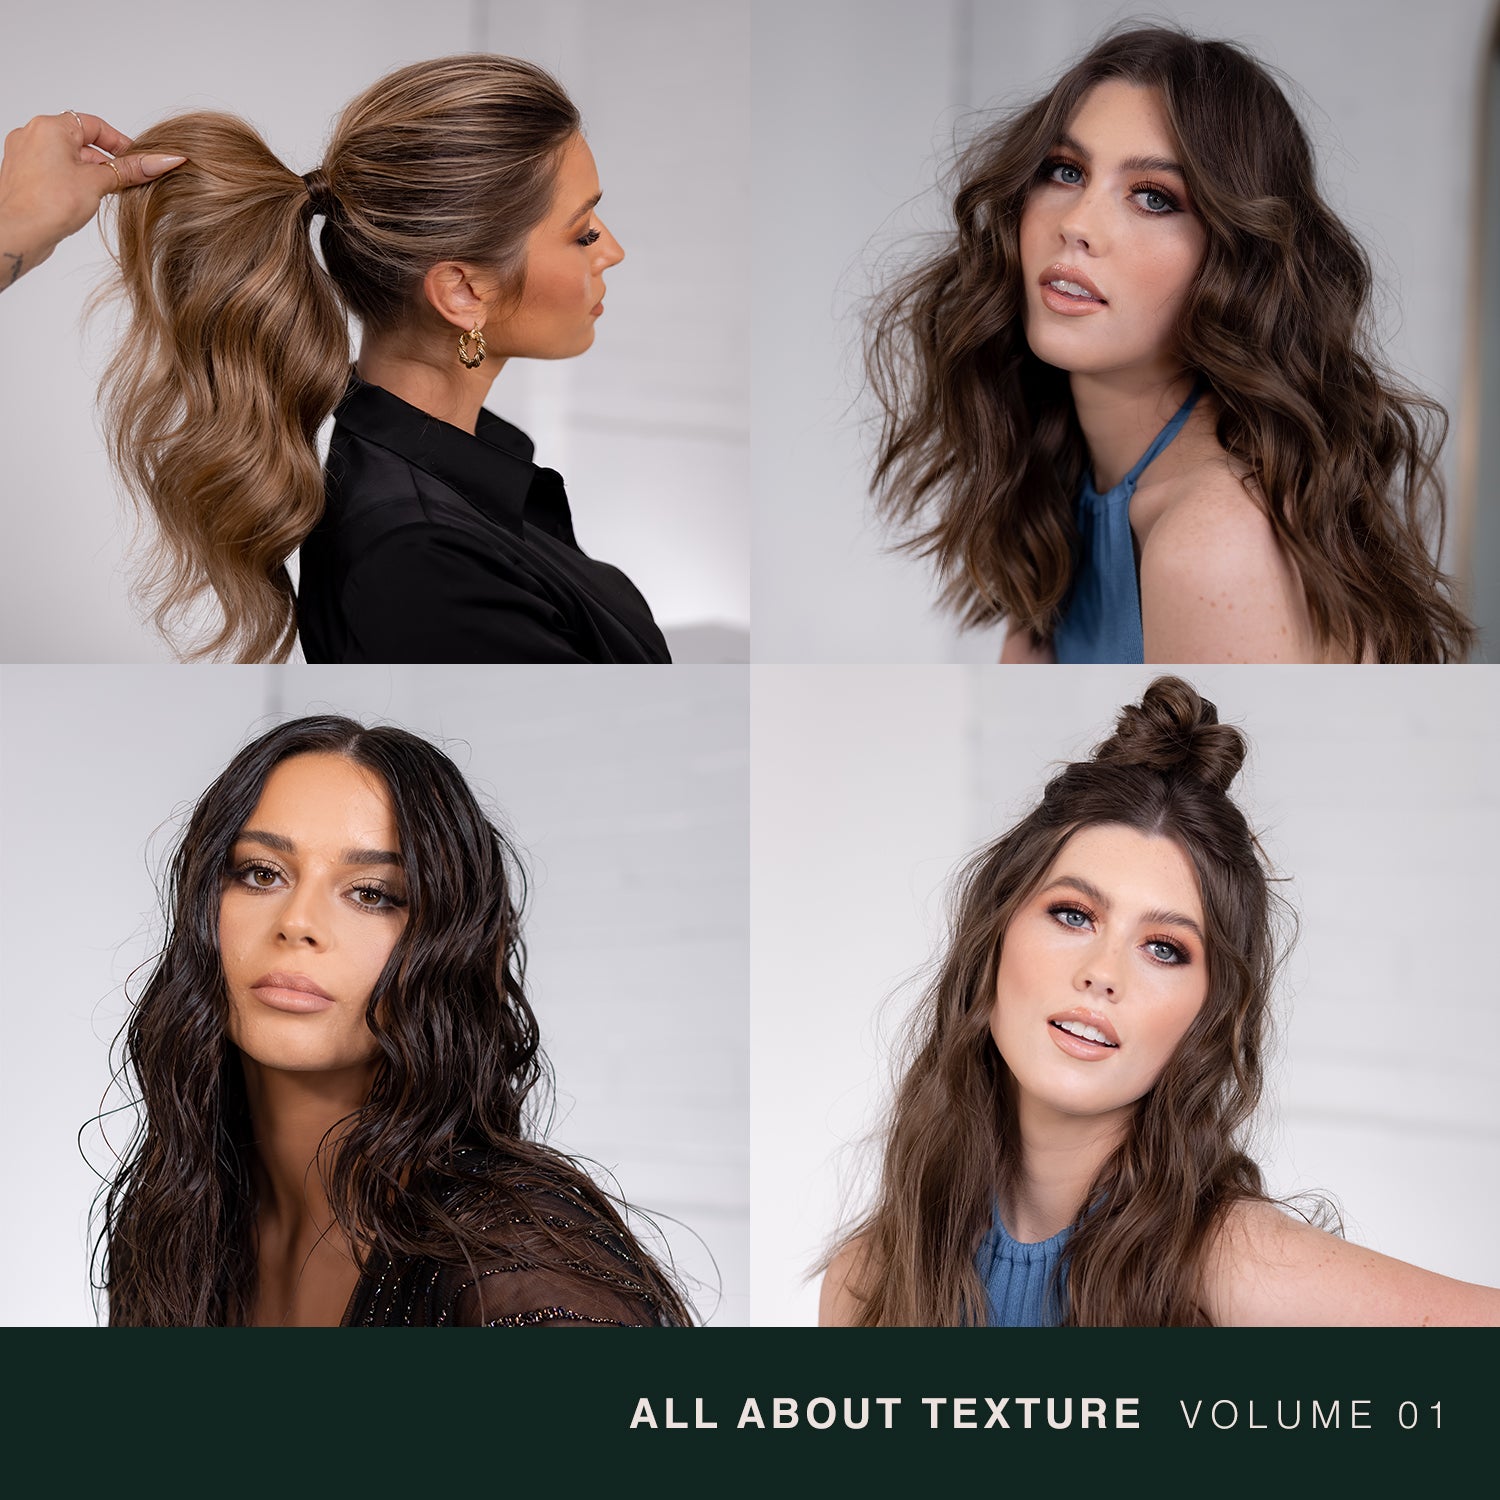 All About Texture Volume 01